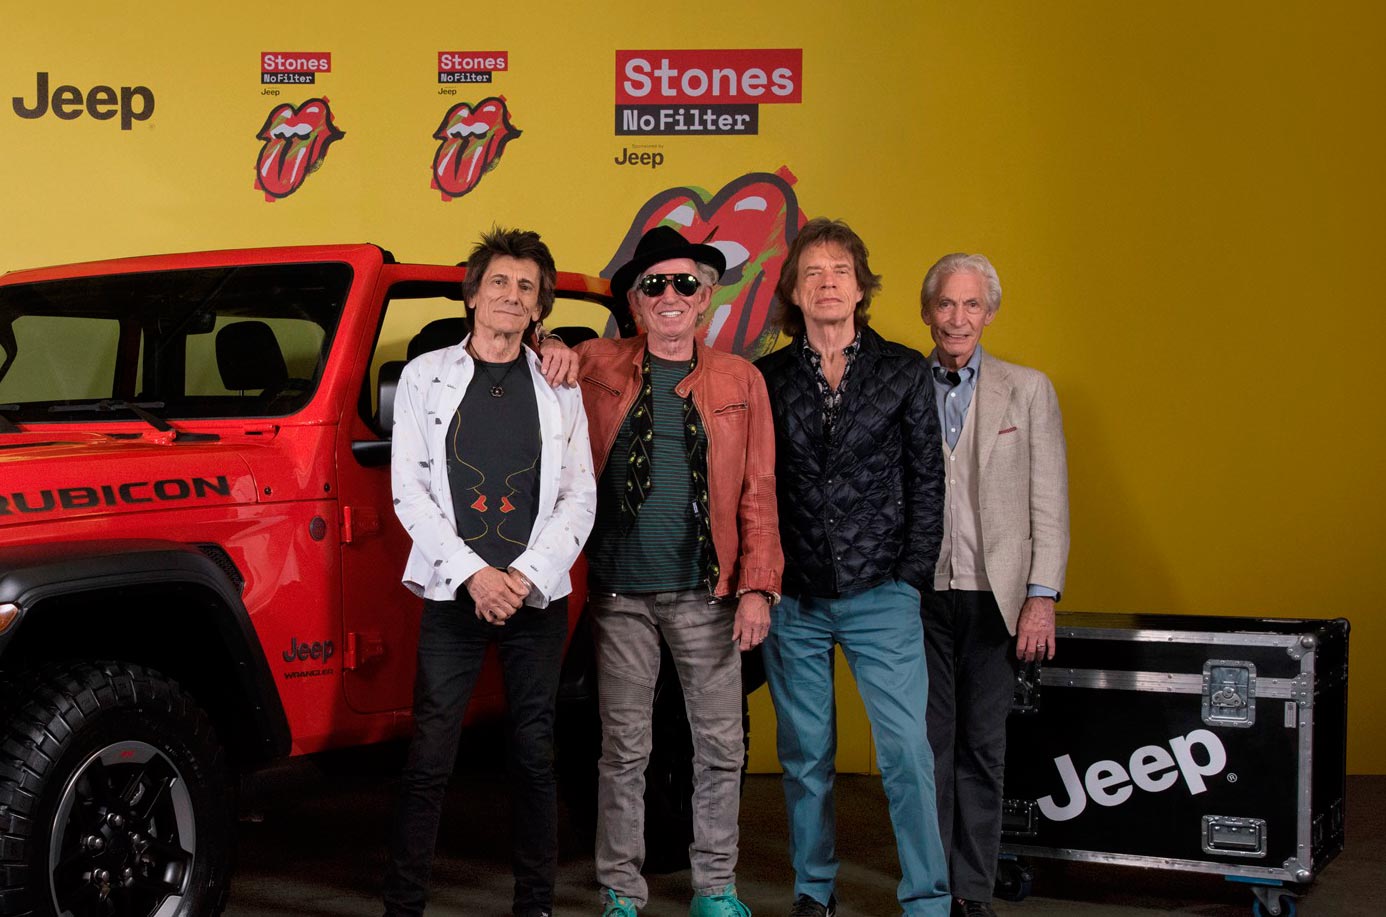 Jeep Wrangler wins big from sponsoring The Rolling Stones’ No Filter tour